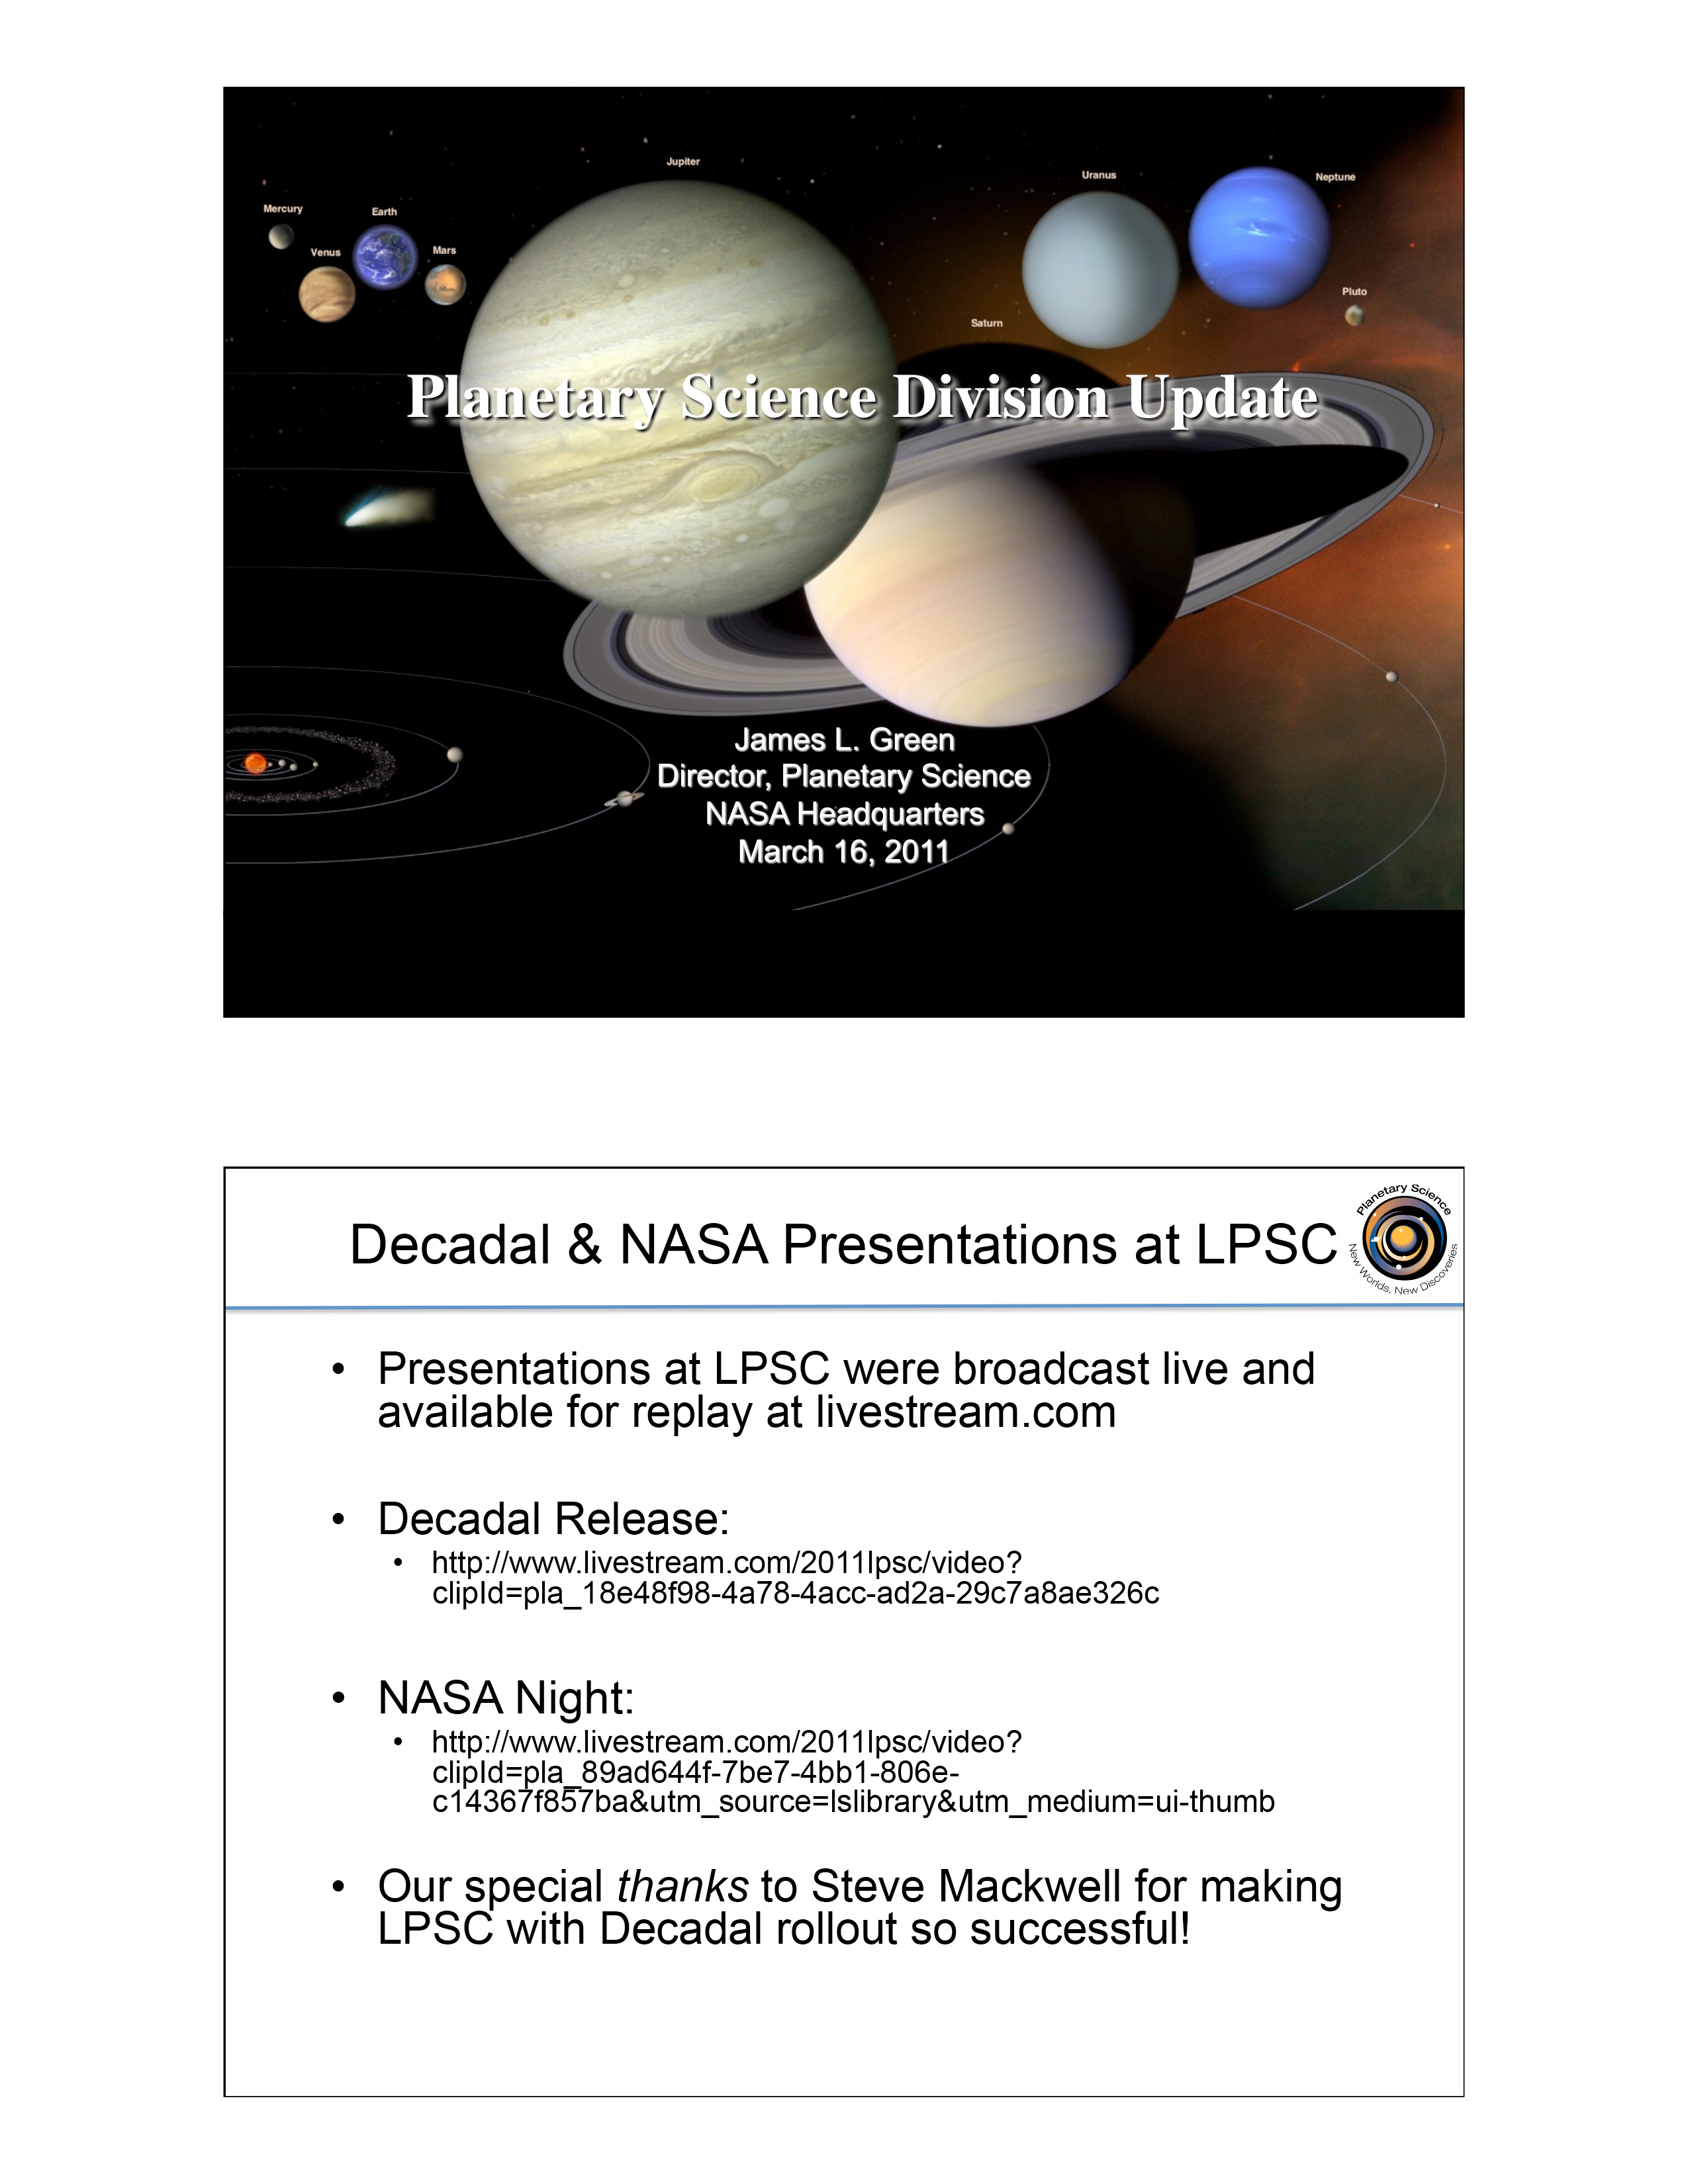 Planetary Science Division Update by Planetary Science Division Director Dr. James Green